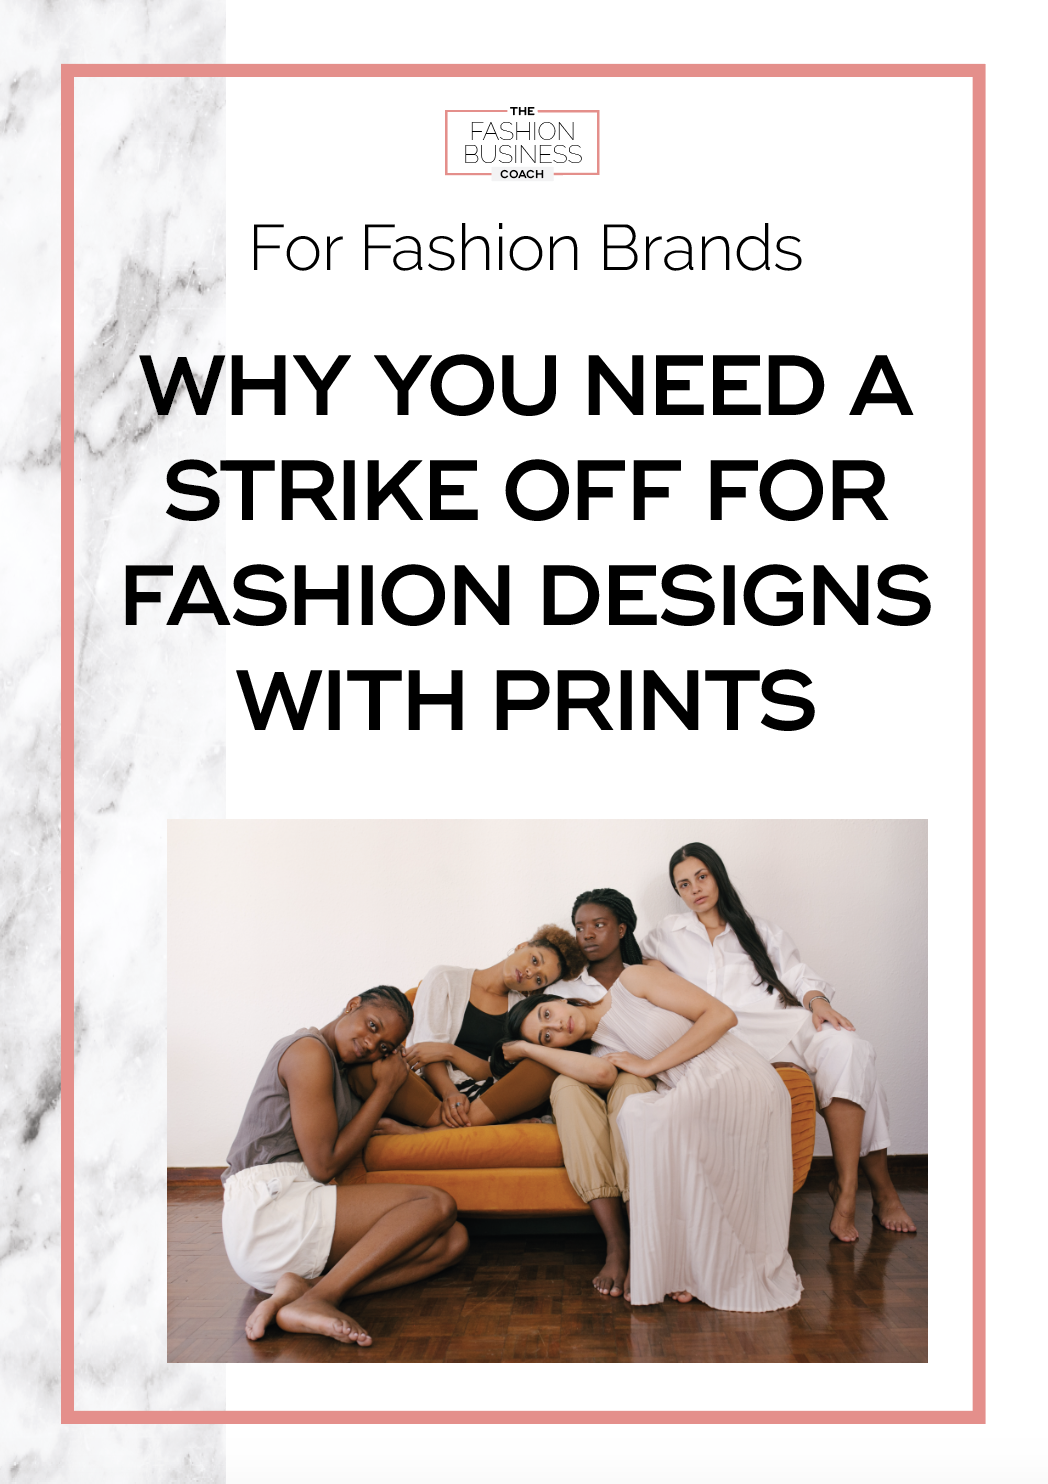 Why You Need a Strike Off for Fashion Designs with Prints 1.png